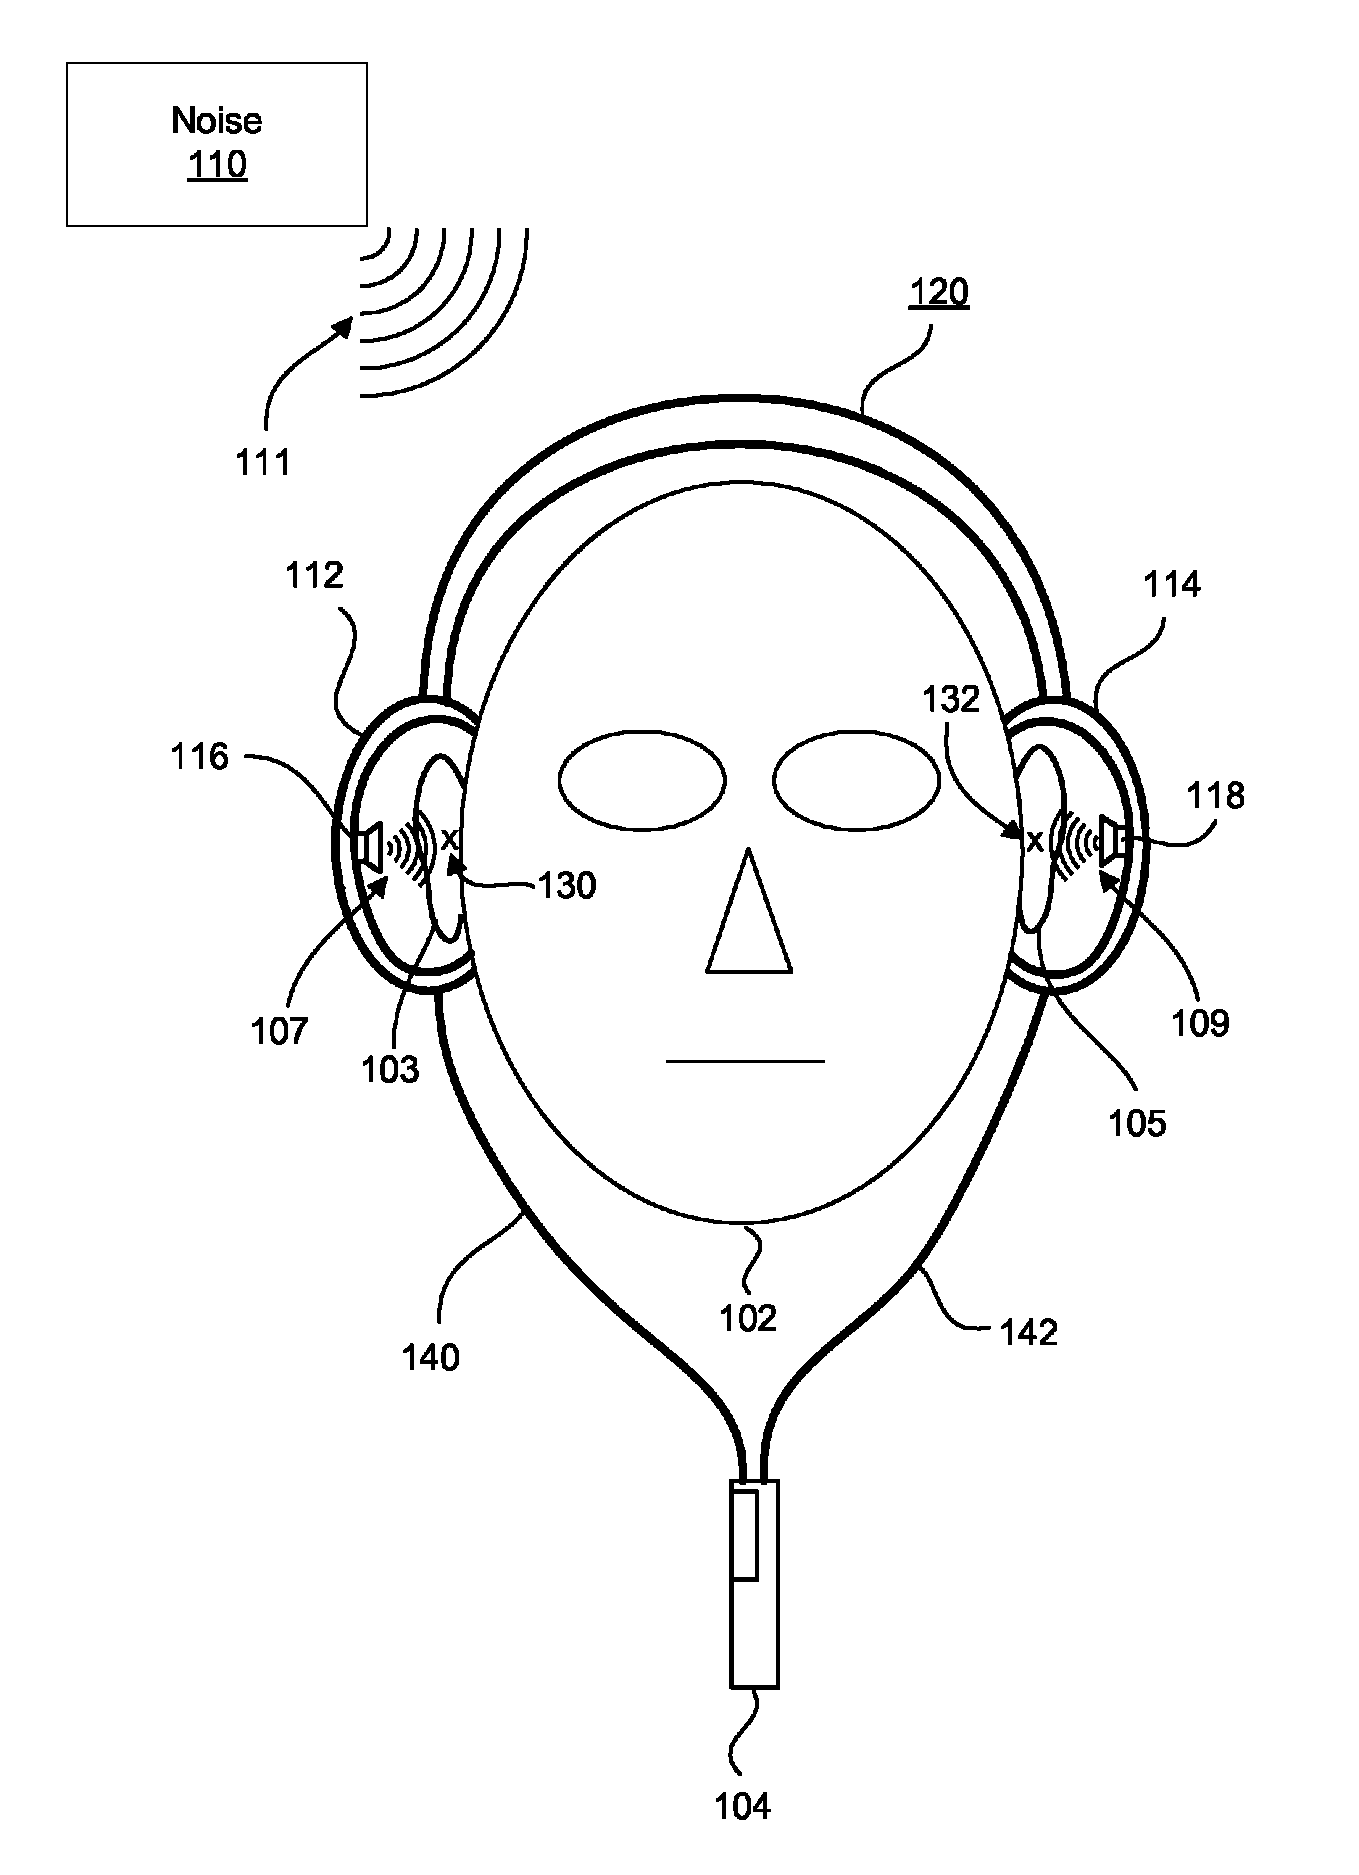 Low latency active noise cancellation system